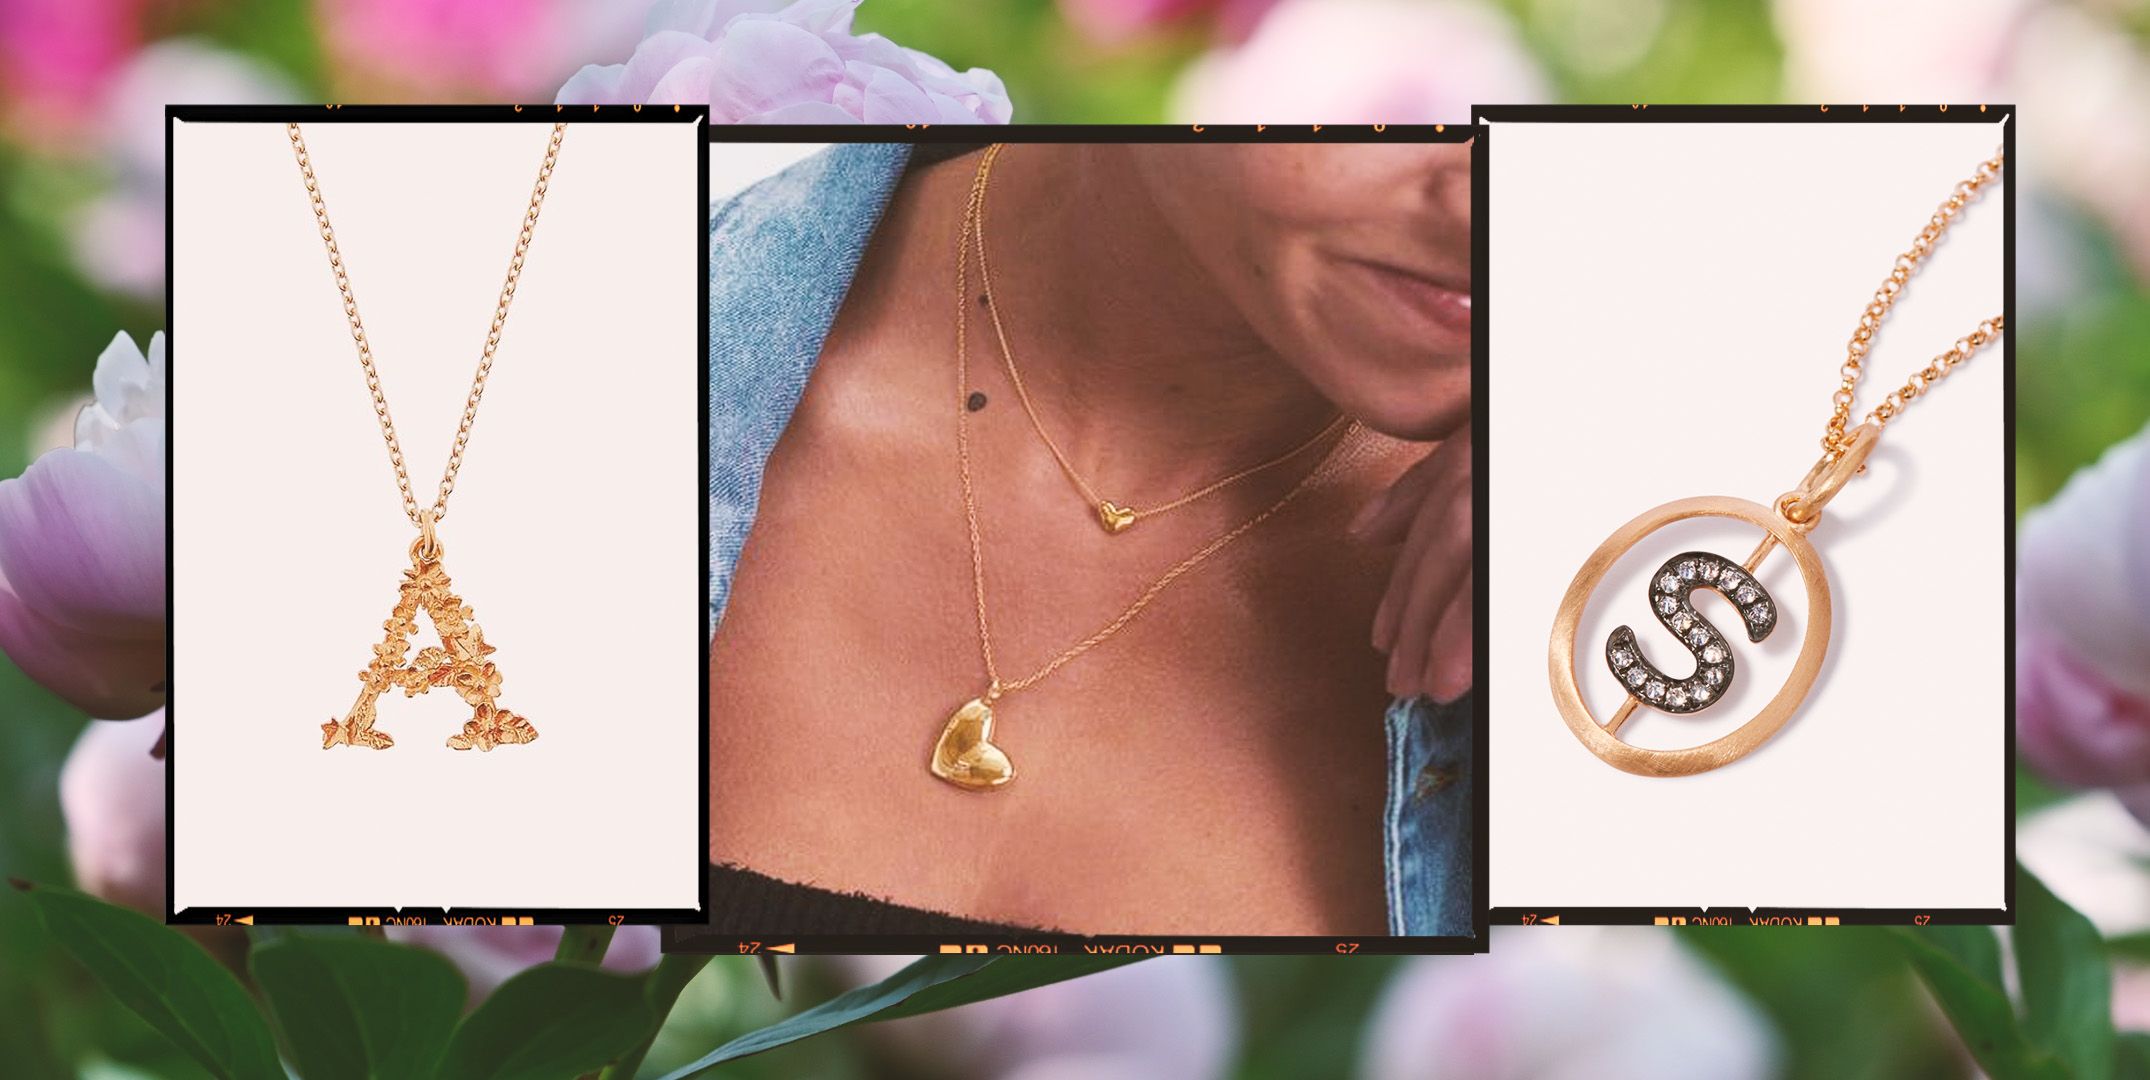 14k Solid Gold Zodiac Gemini Custom Engraved Necklace, 2 Sided Gold Gemini  Sign and Personalized Pendant Necklace is a Great Gift for Her. - Etsy